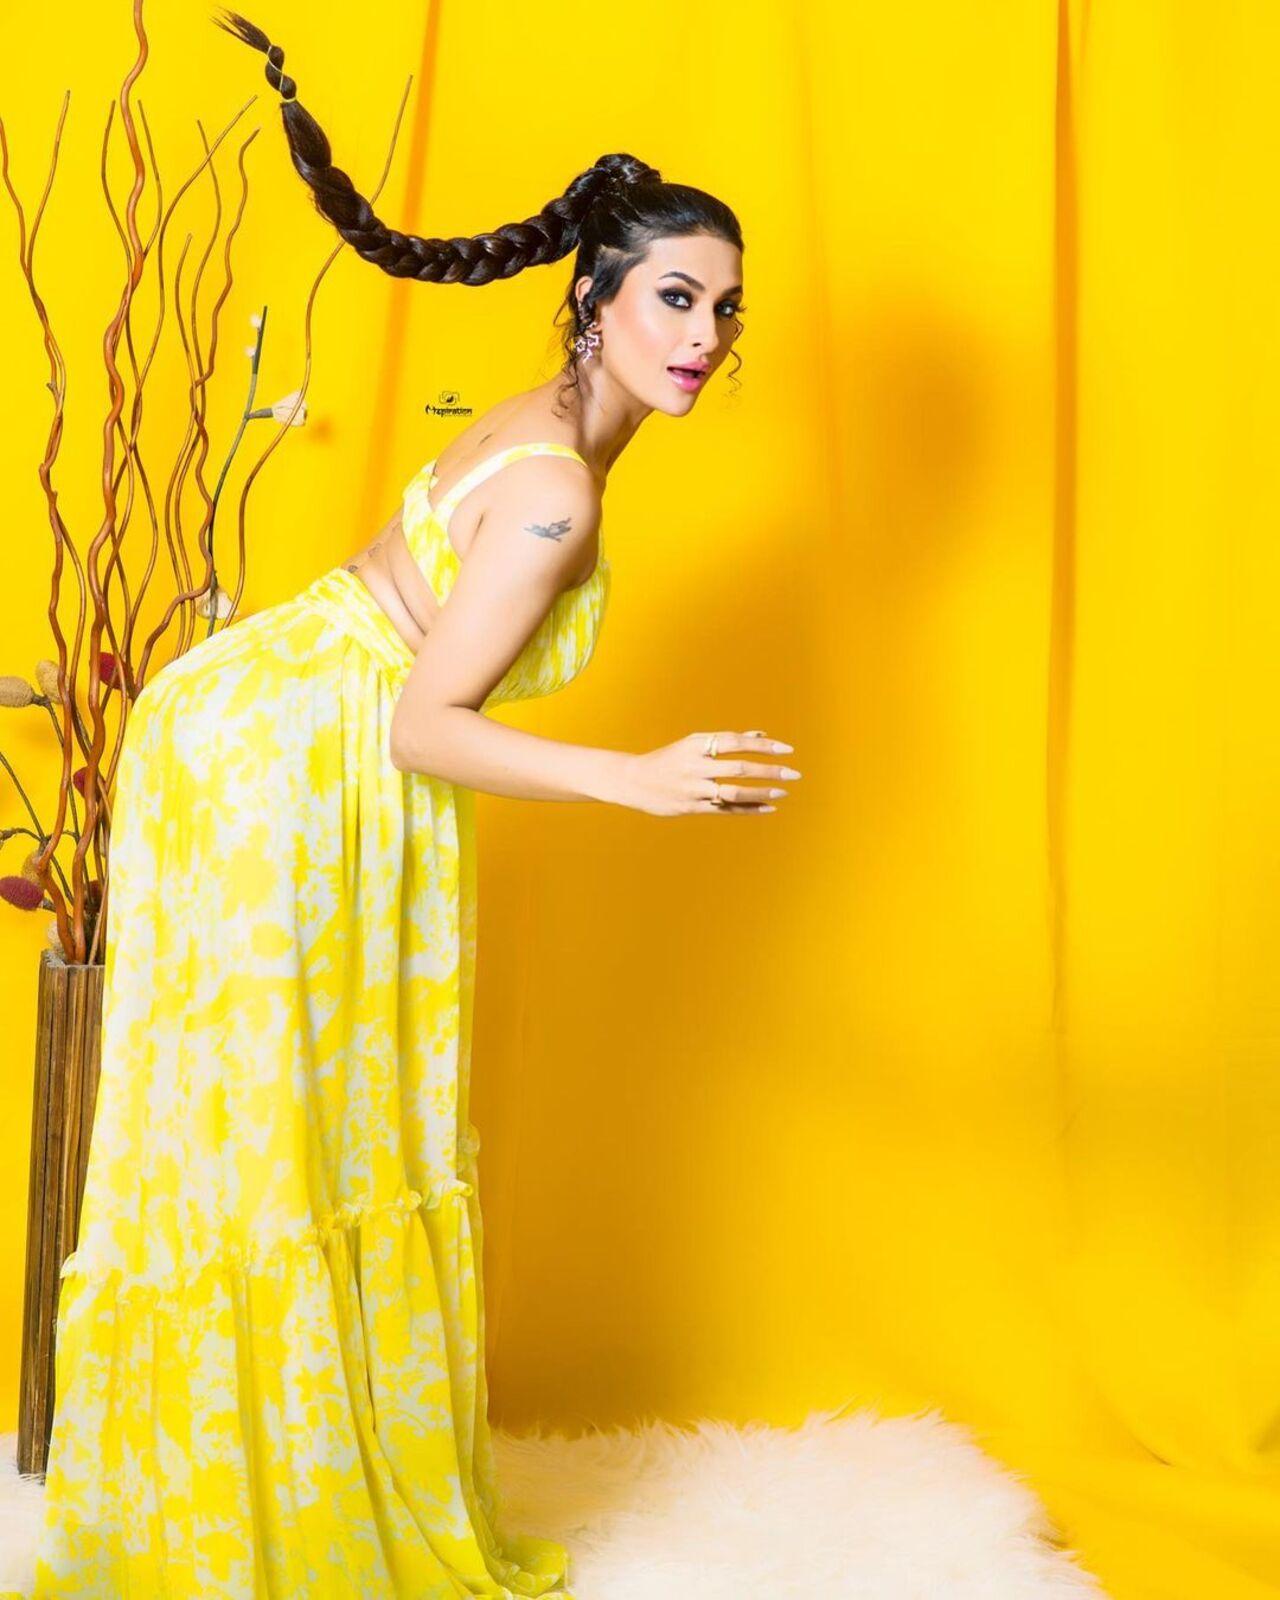 This look of Pavita Punia can be perfect for your brunch date. She opted for a pretty yellow gown and tied her hair in a classy braid